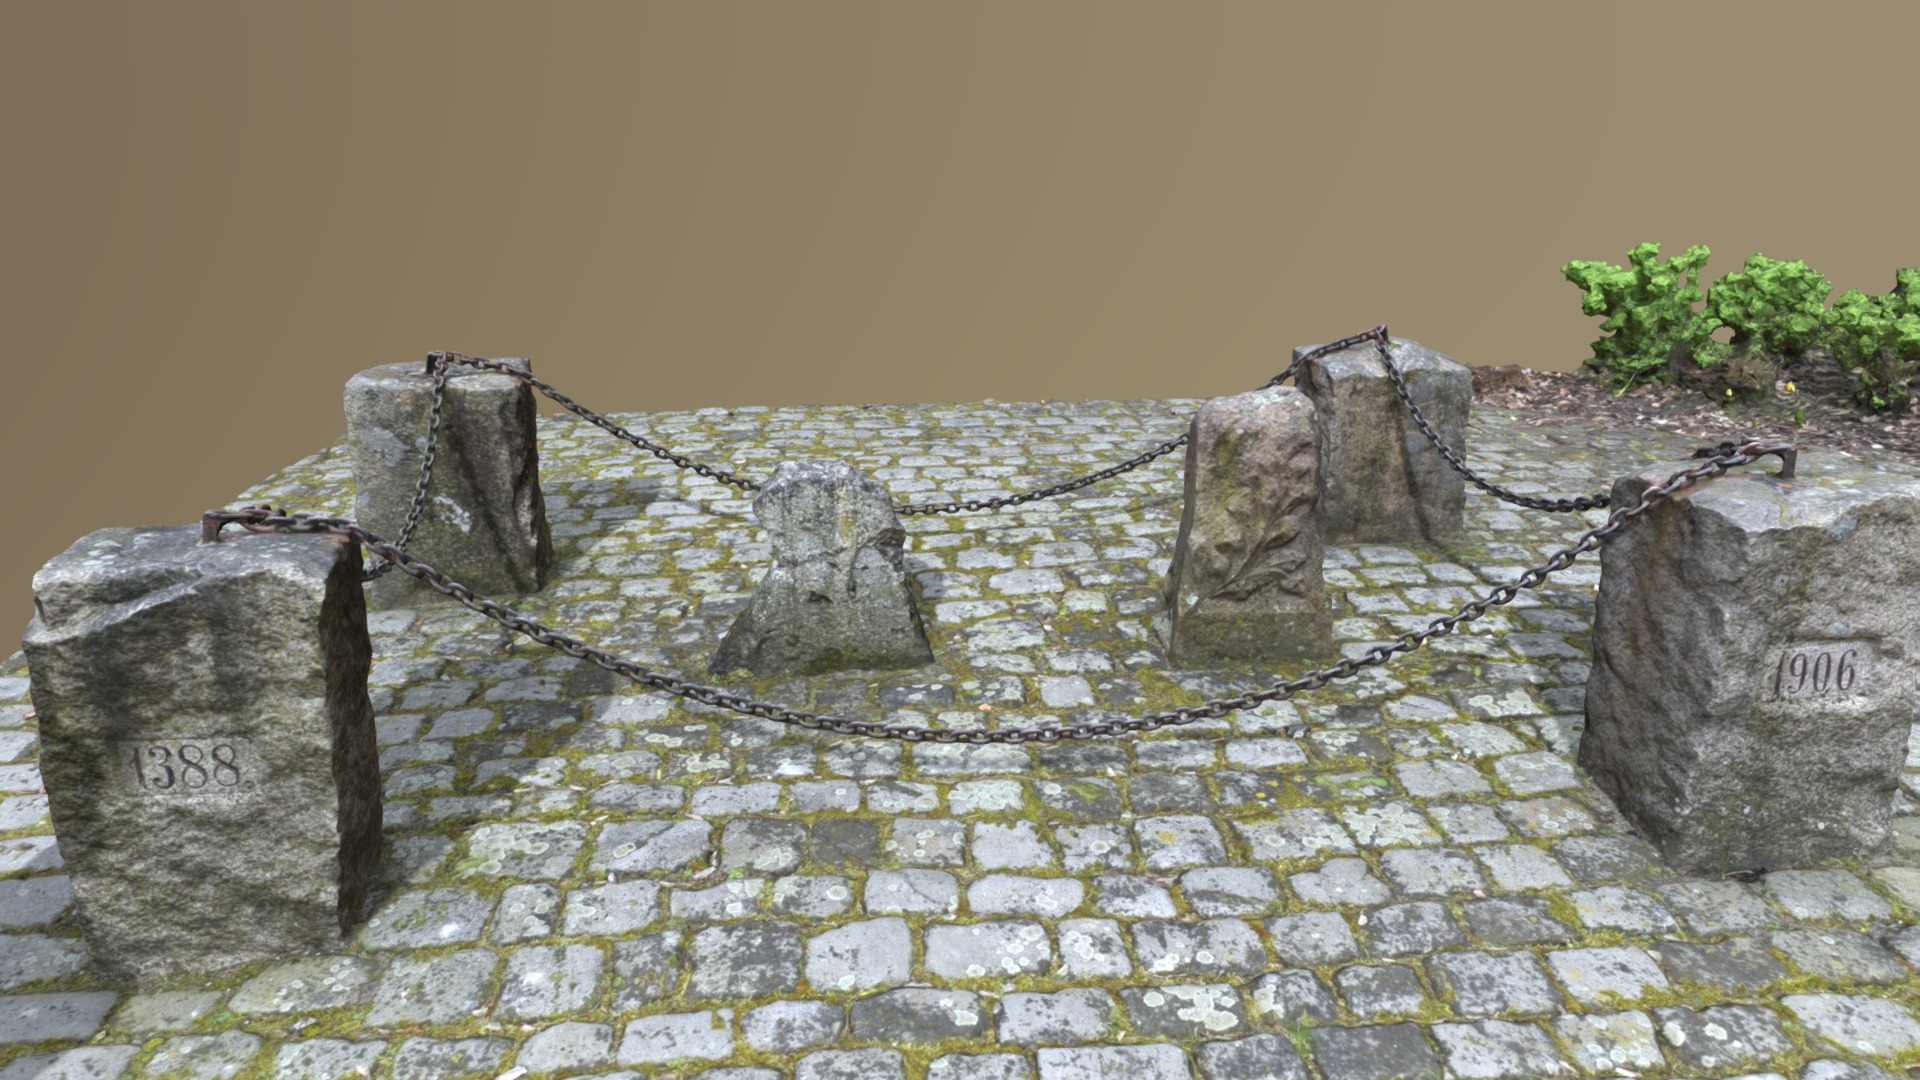 3D model Prinzensteine - This is a 3D model of the Prinzensteine. The 3D model is about a stone wall with a chain.